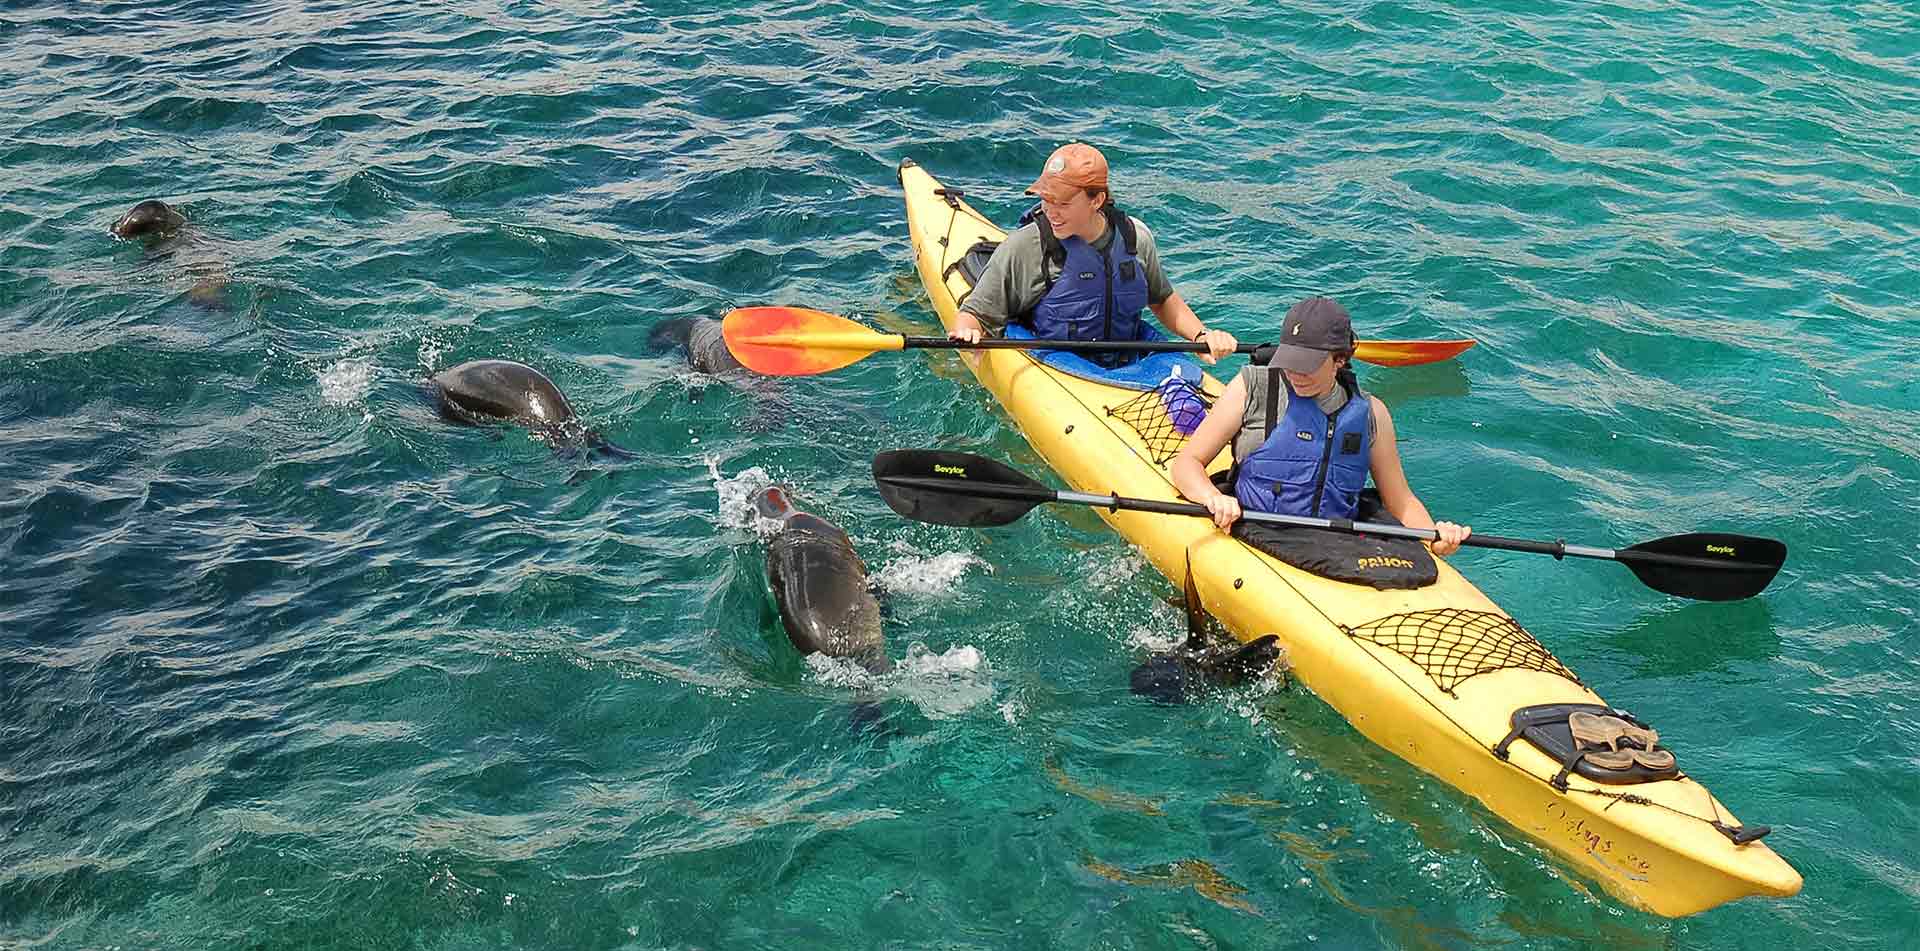 Kayaking with Sea Lions in the Galapagos Islands